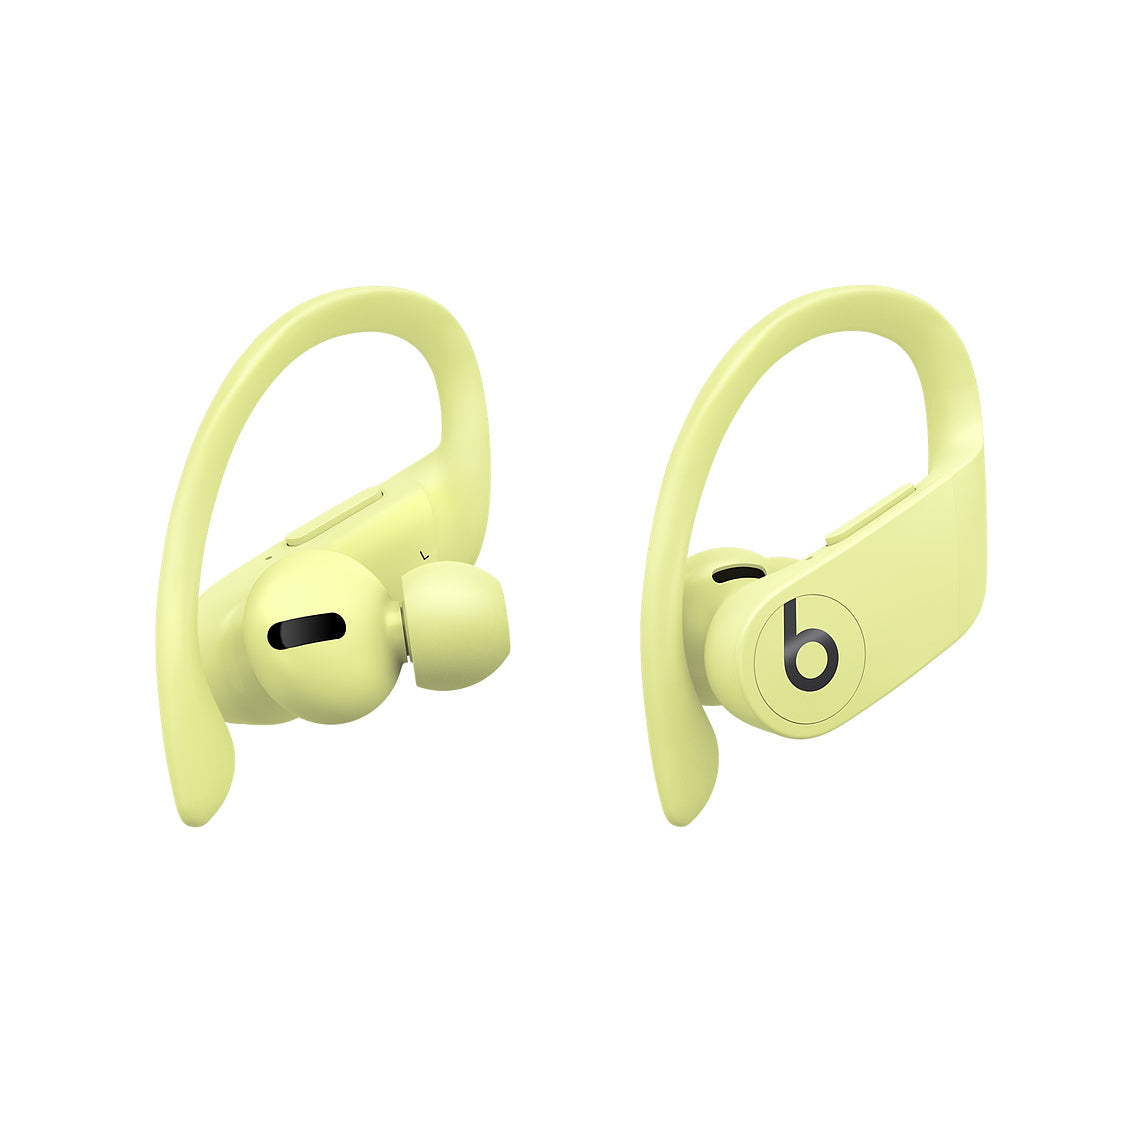 Powerbeats Pro Totally Wireless &amp; High-Performance Bluetooth Earphones - Spring Yellow (Certified Refurbished)